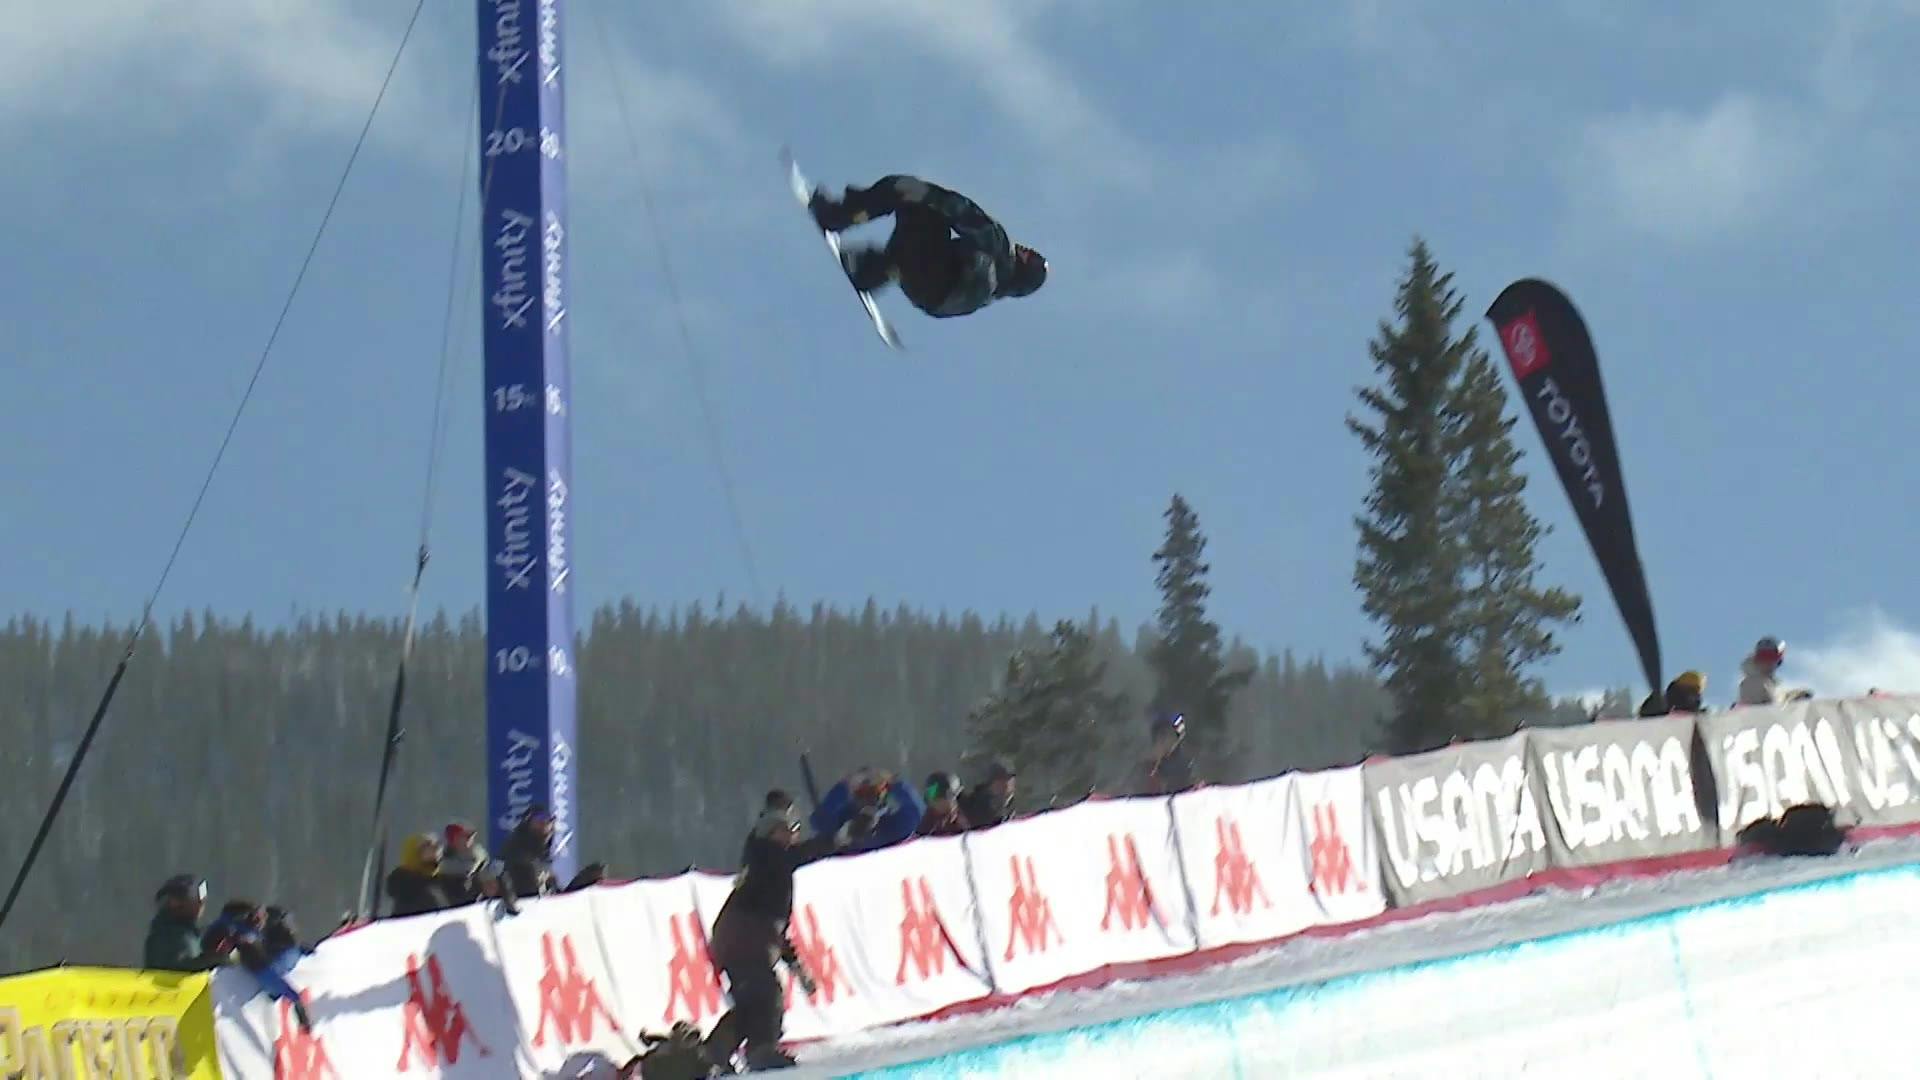 Toyota U.S. Grand Prix Copper Mountain: Men's and Women's Snowboard World Cup Halfpipe Finals | USSS Event Replays